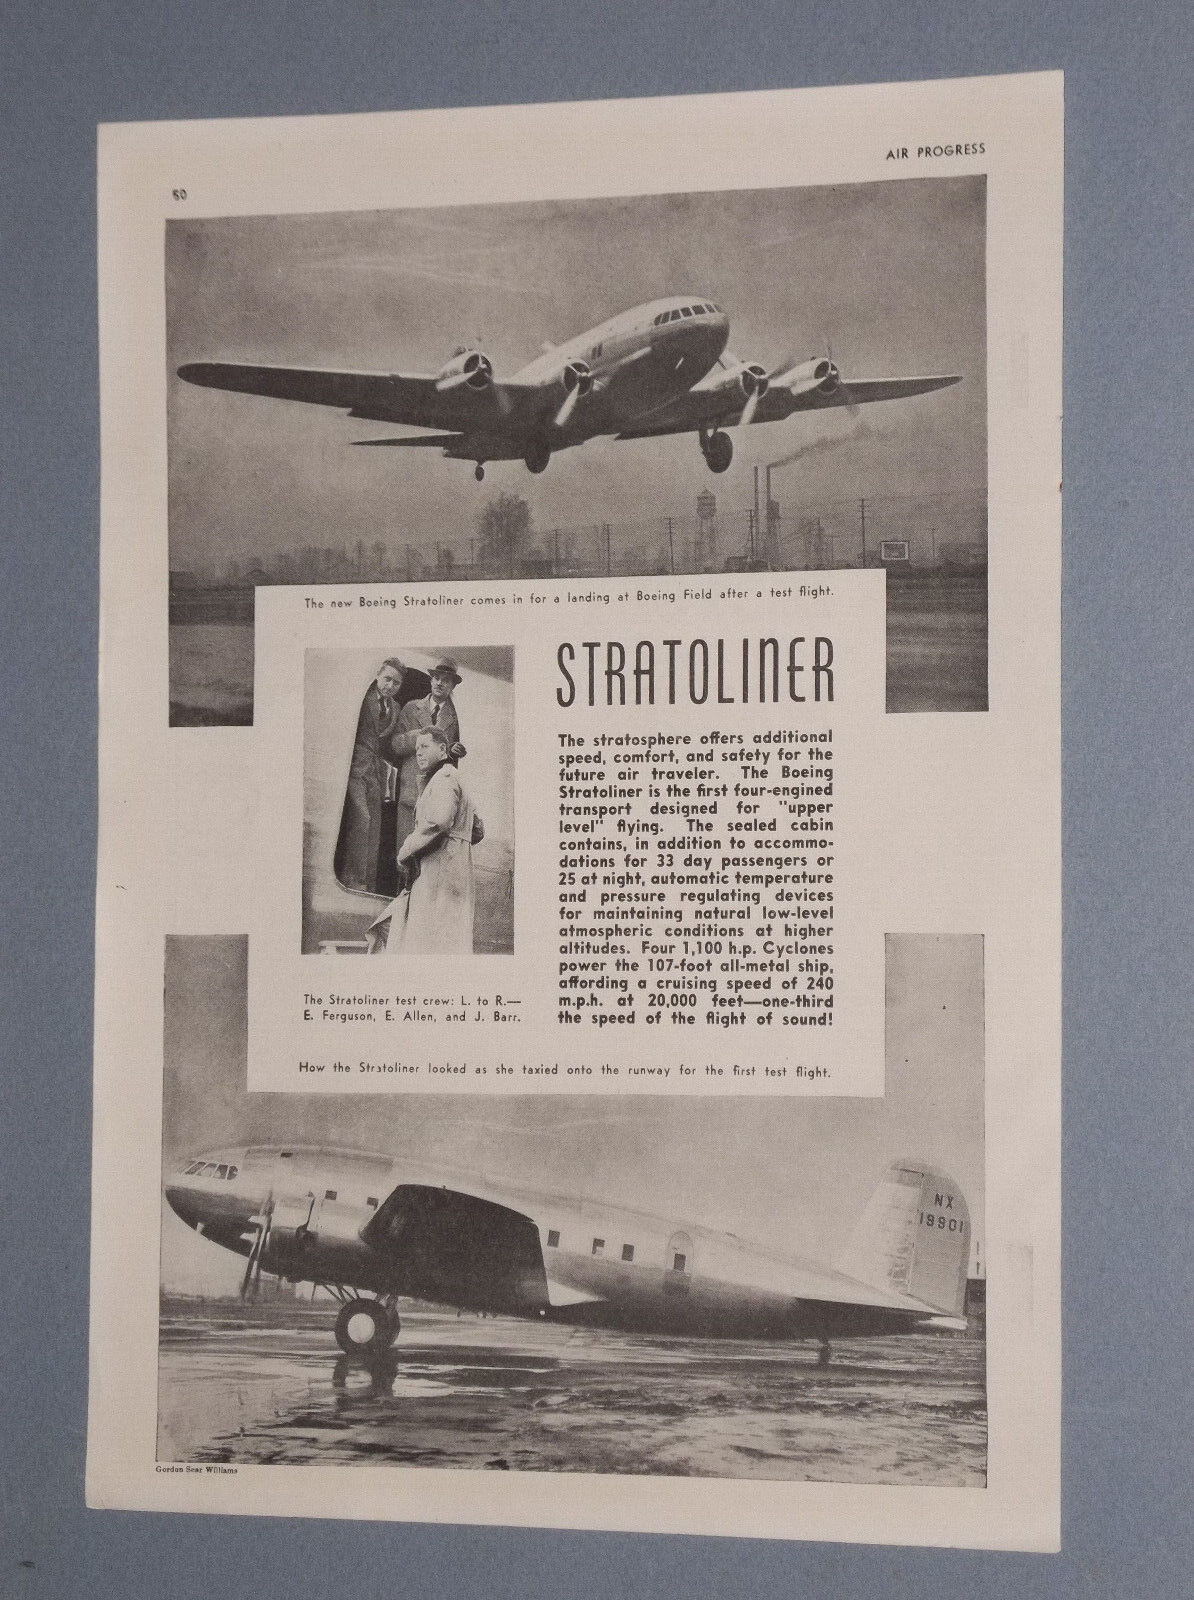 1939 BOEING STRATOLINER AIRCRAFT AD LARGE PASSENGER AIRPLANE